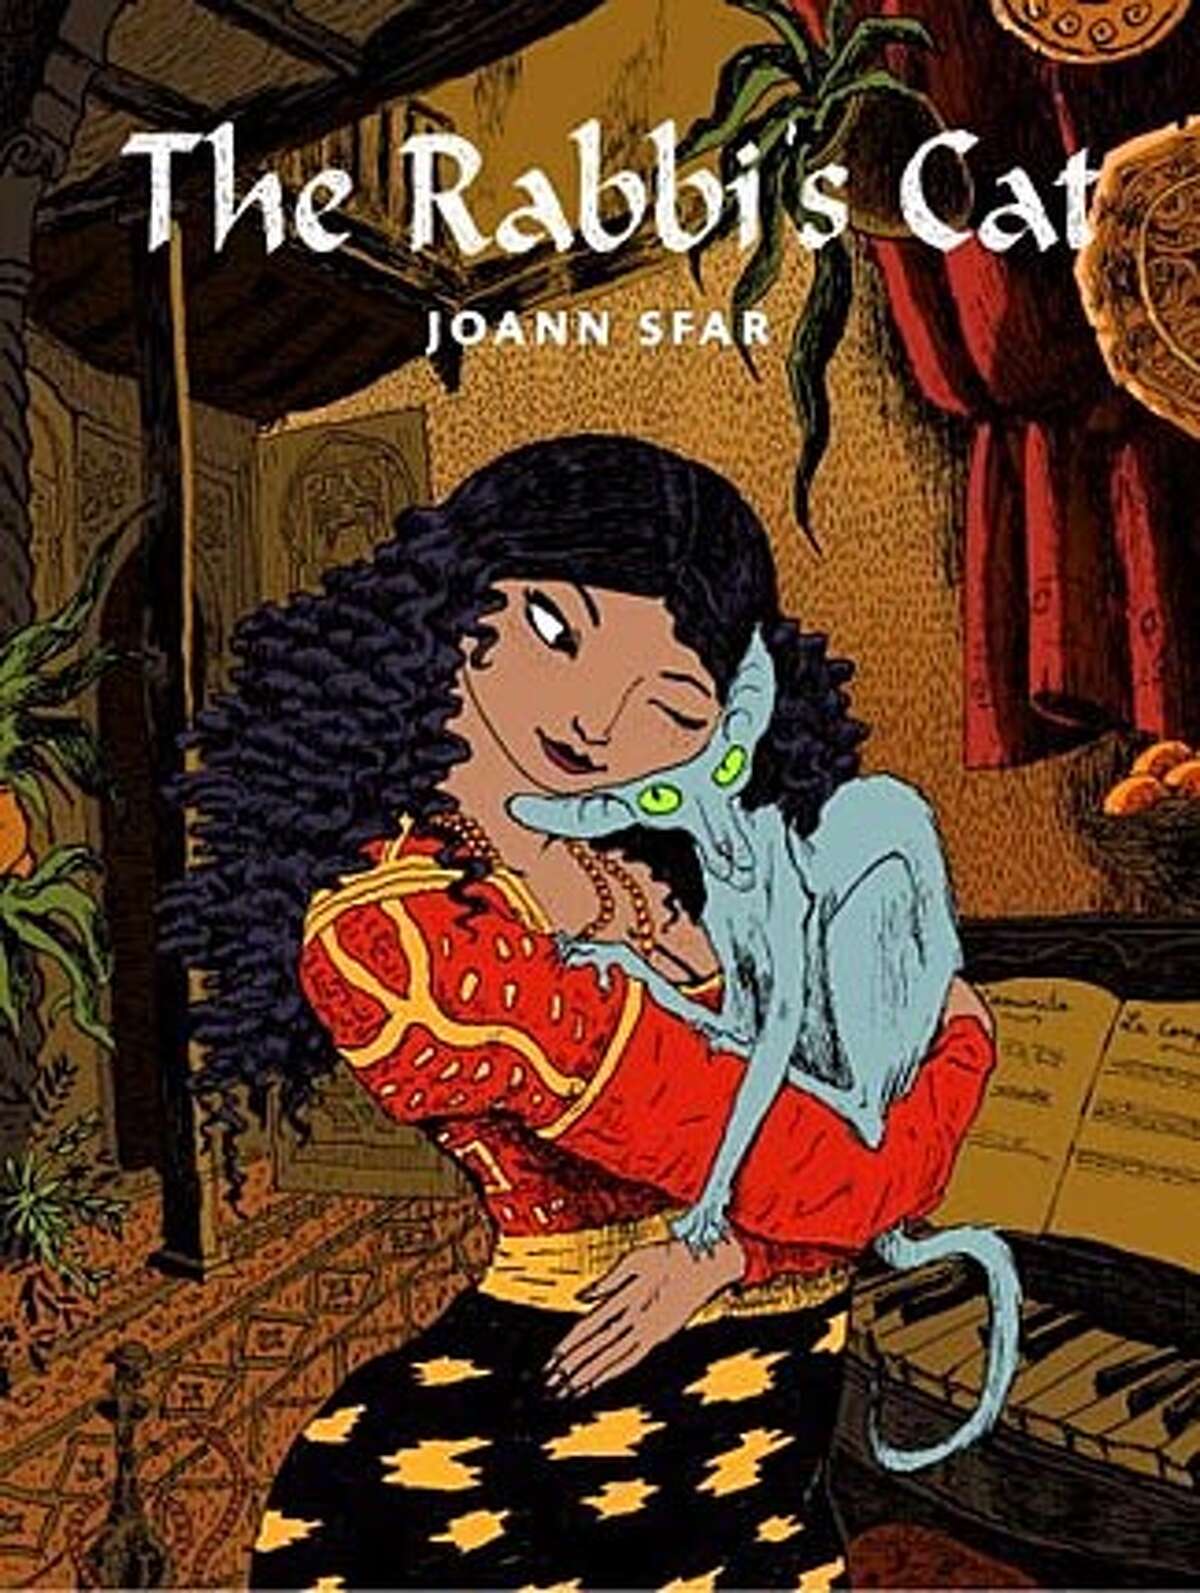 Book cover art for, "The Rabbi's Cat" by Joann Sfar. BookReview#BookReview#Chronicle#08-14-2005#ALL#2star#e5#0423163696